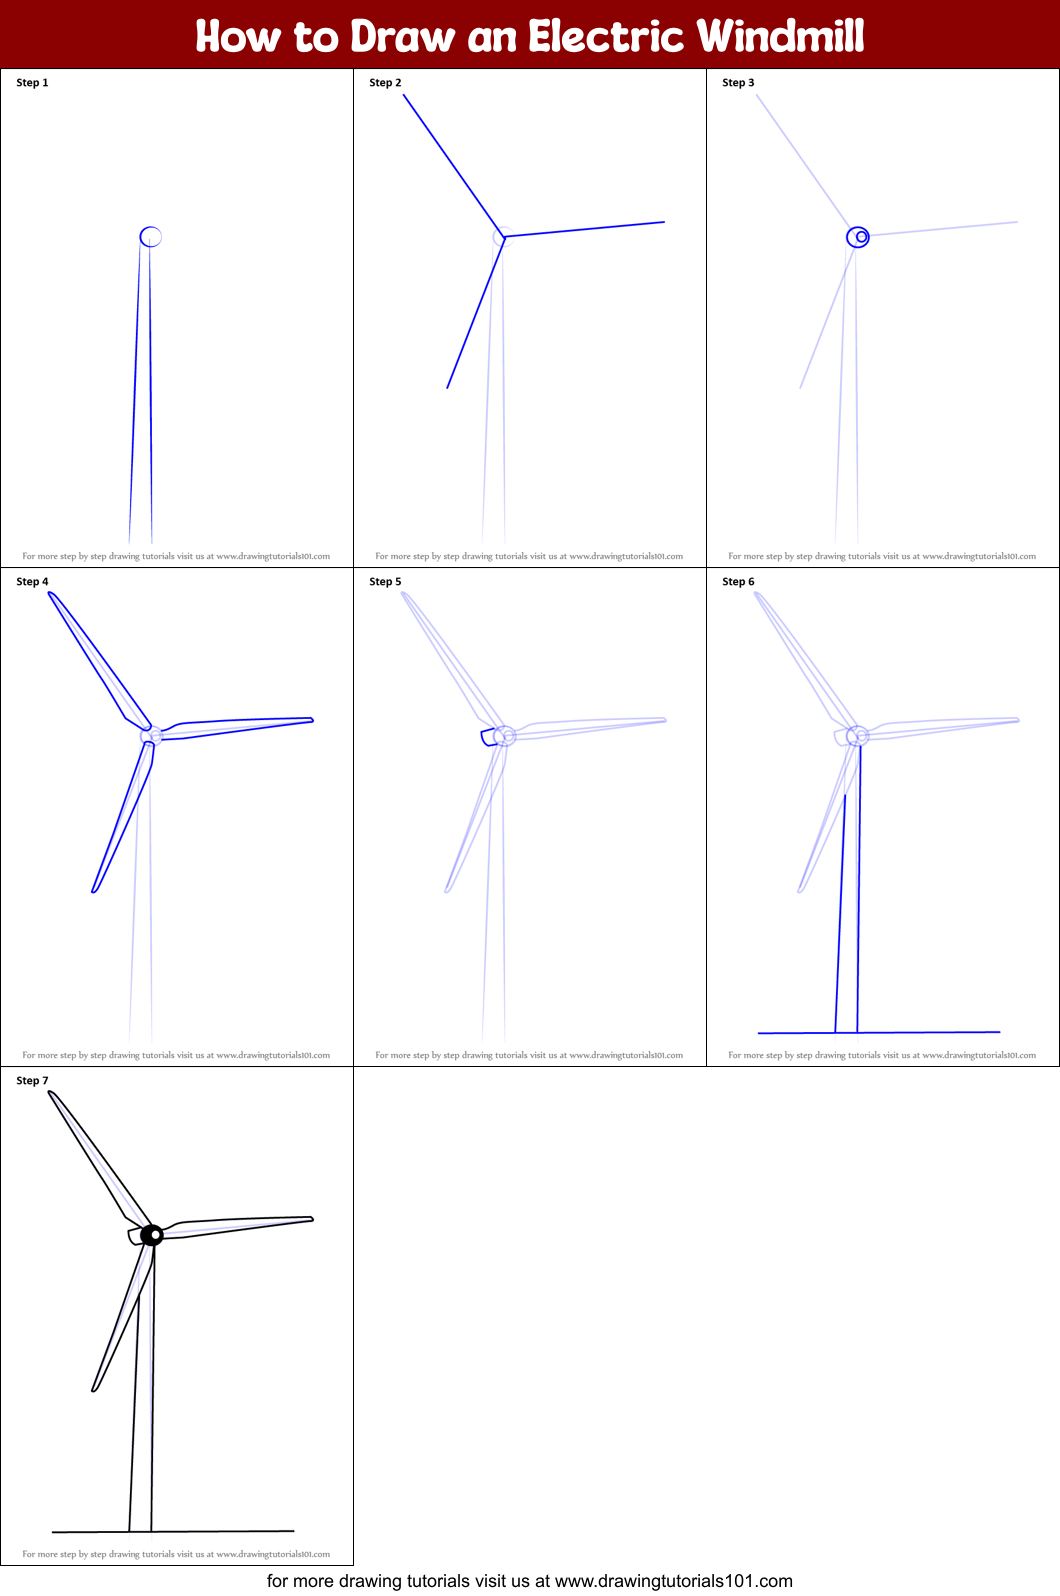 How to Draw an Electric Windmill printable step by step drawing sheet